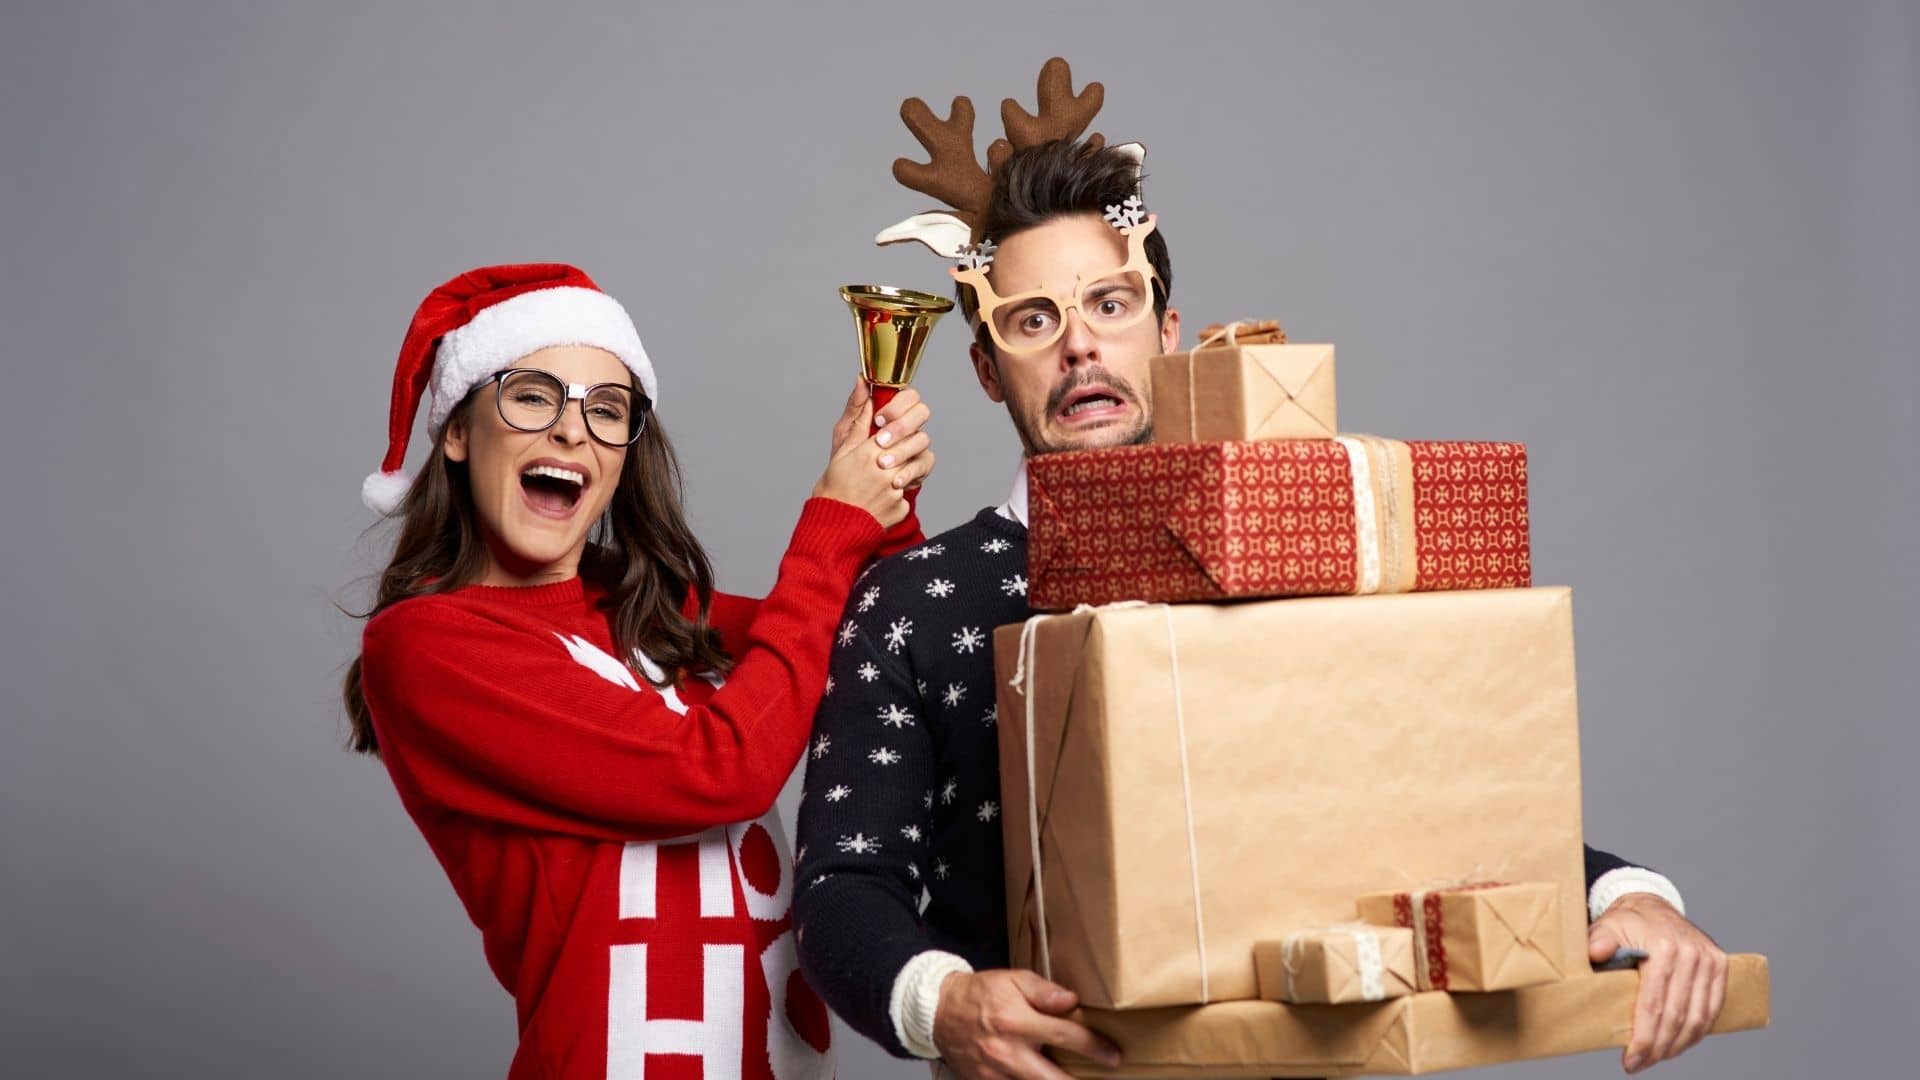 5 Top Tips to make your finances Christmas Ready